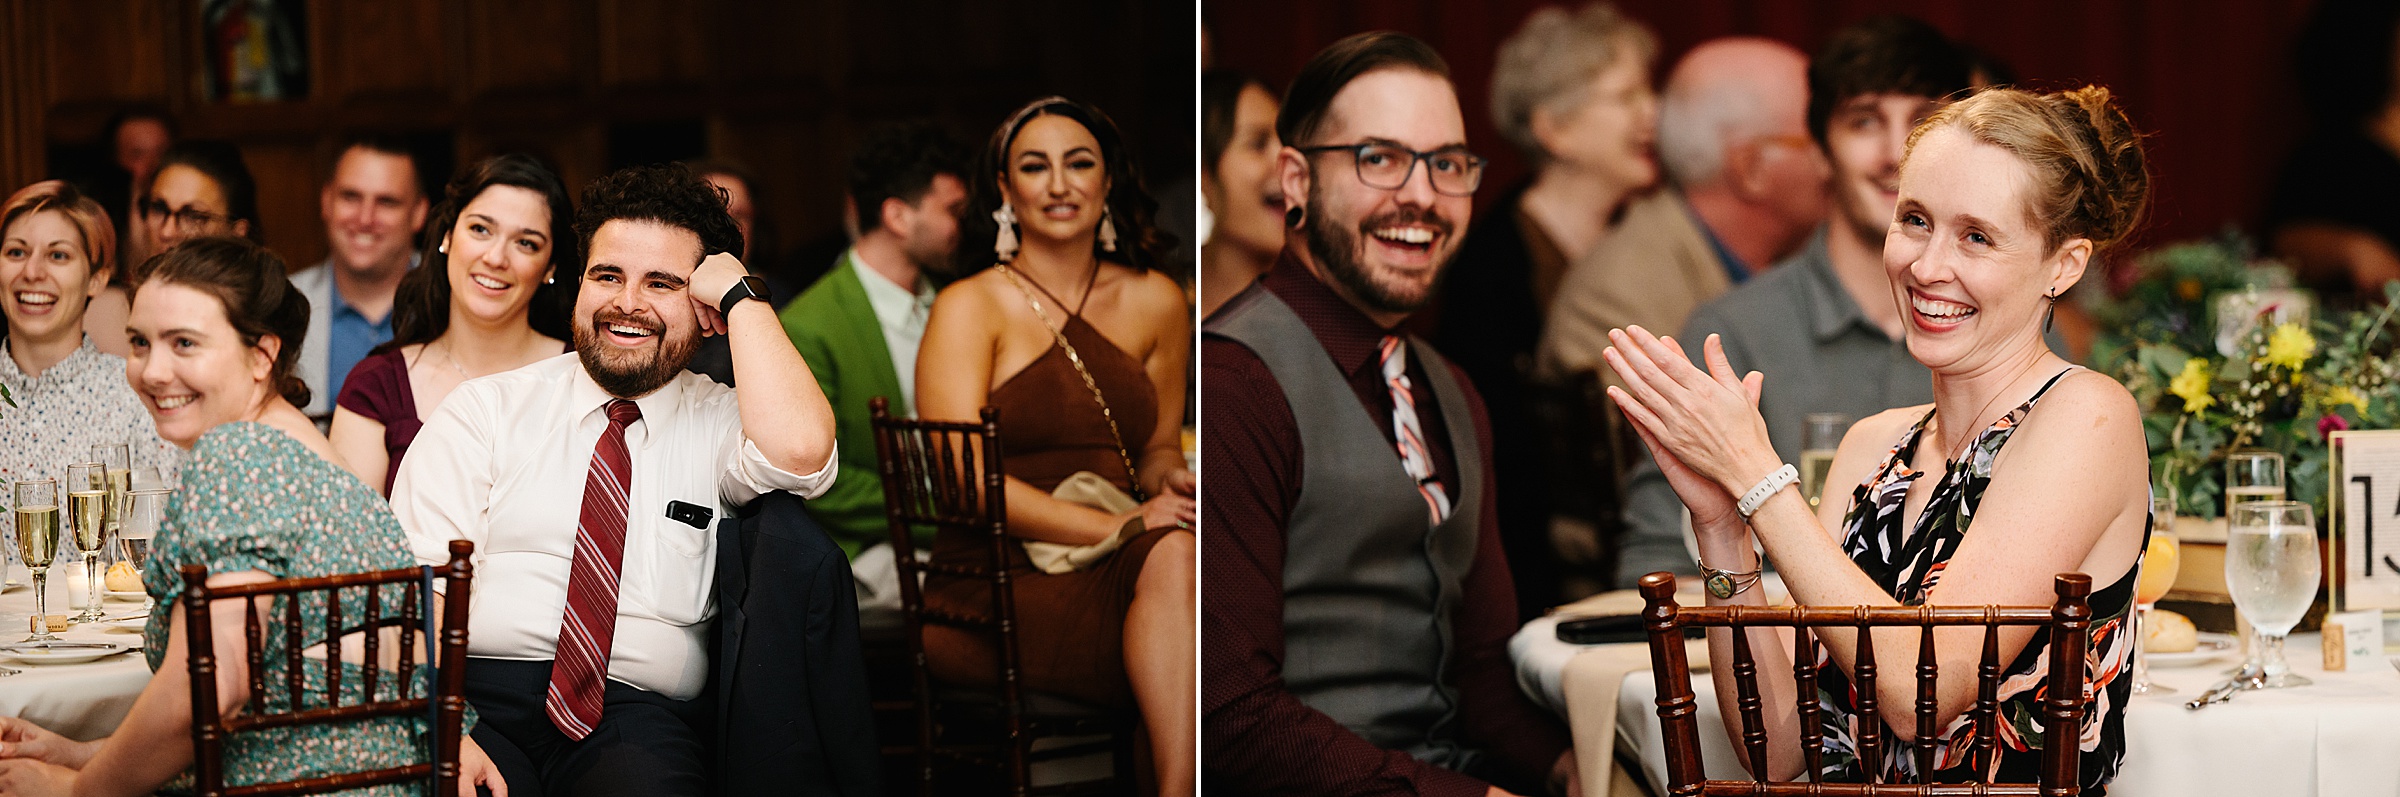 Guests laugh and smile as they listen to toasts at the Gem Theater wedding reception by Detroit Wedding Photographer Michele Maloney